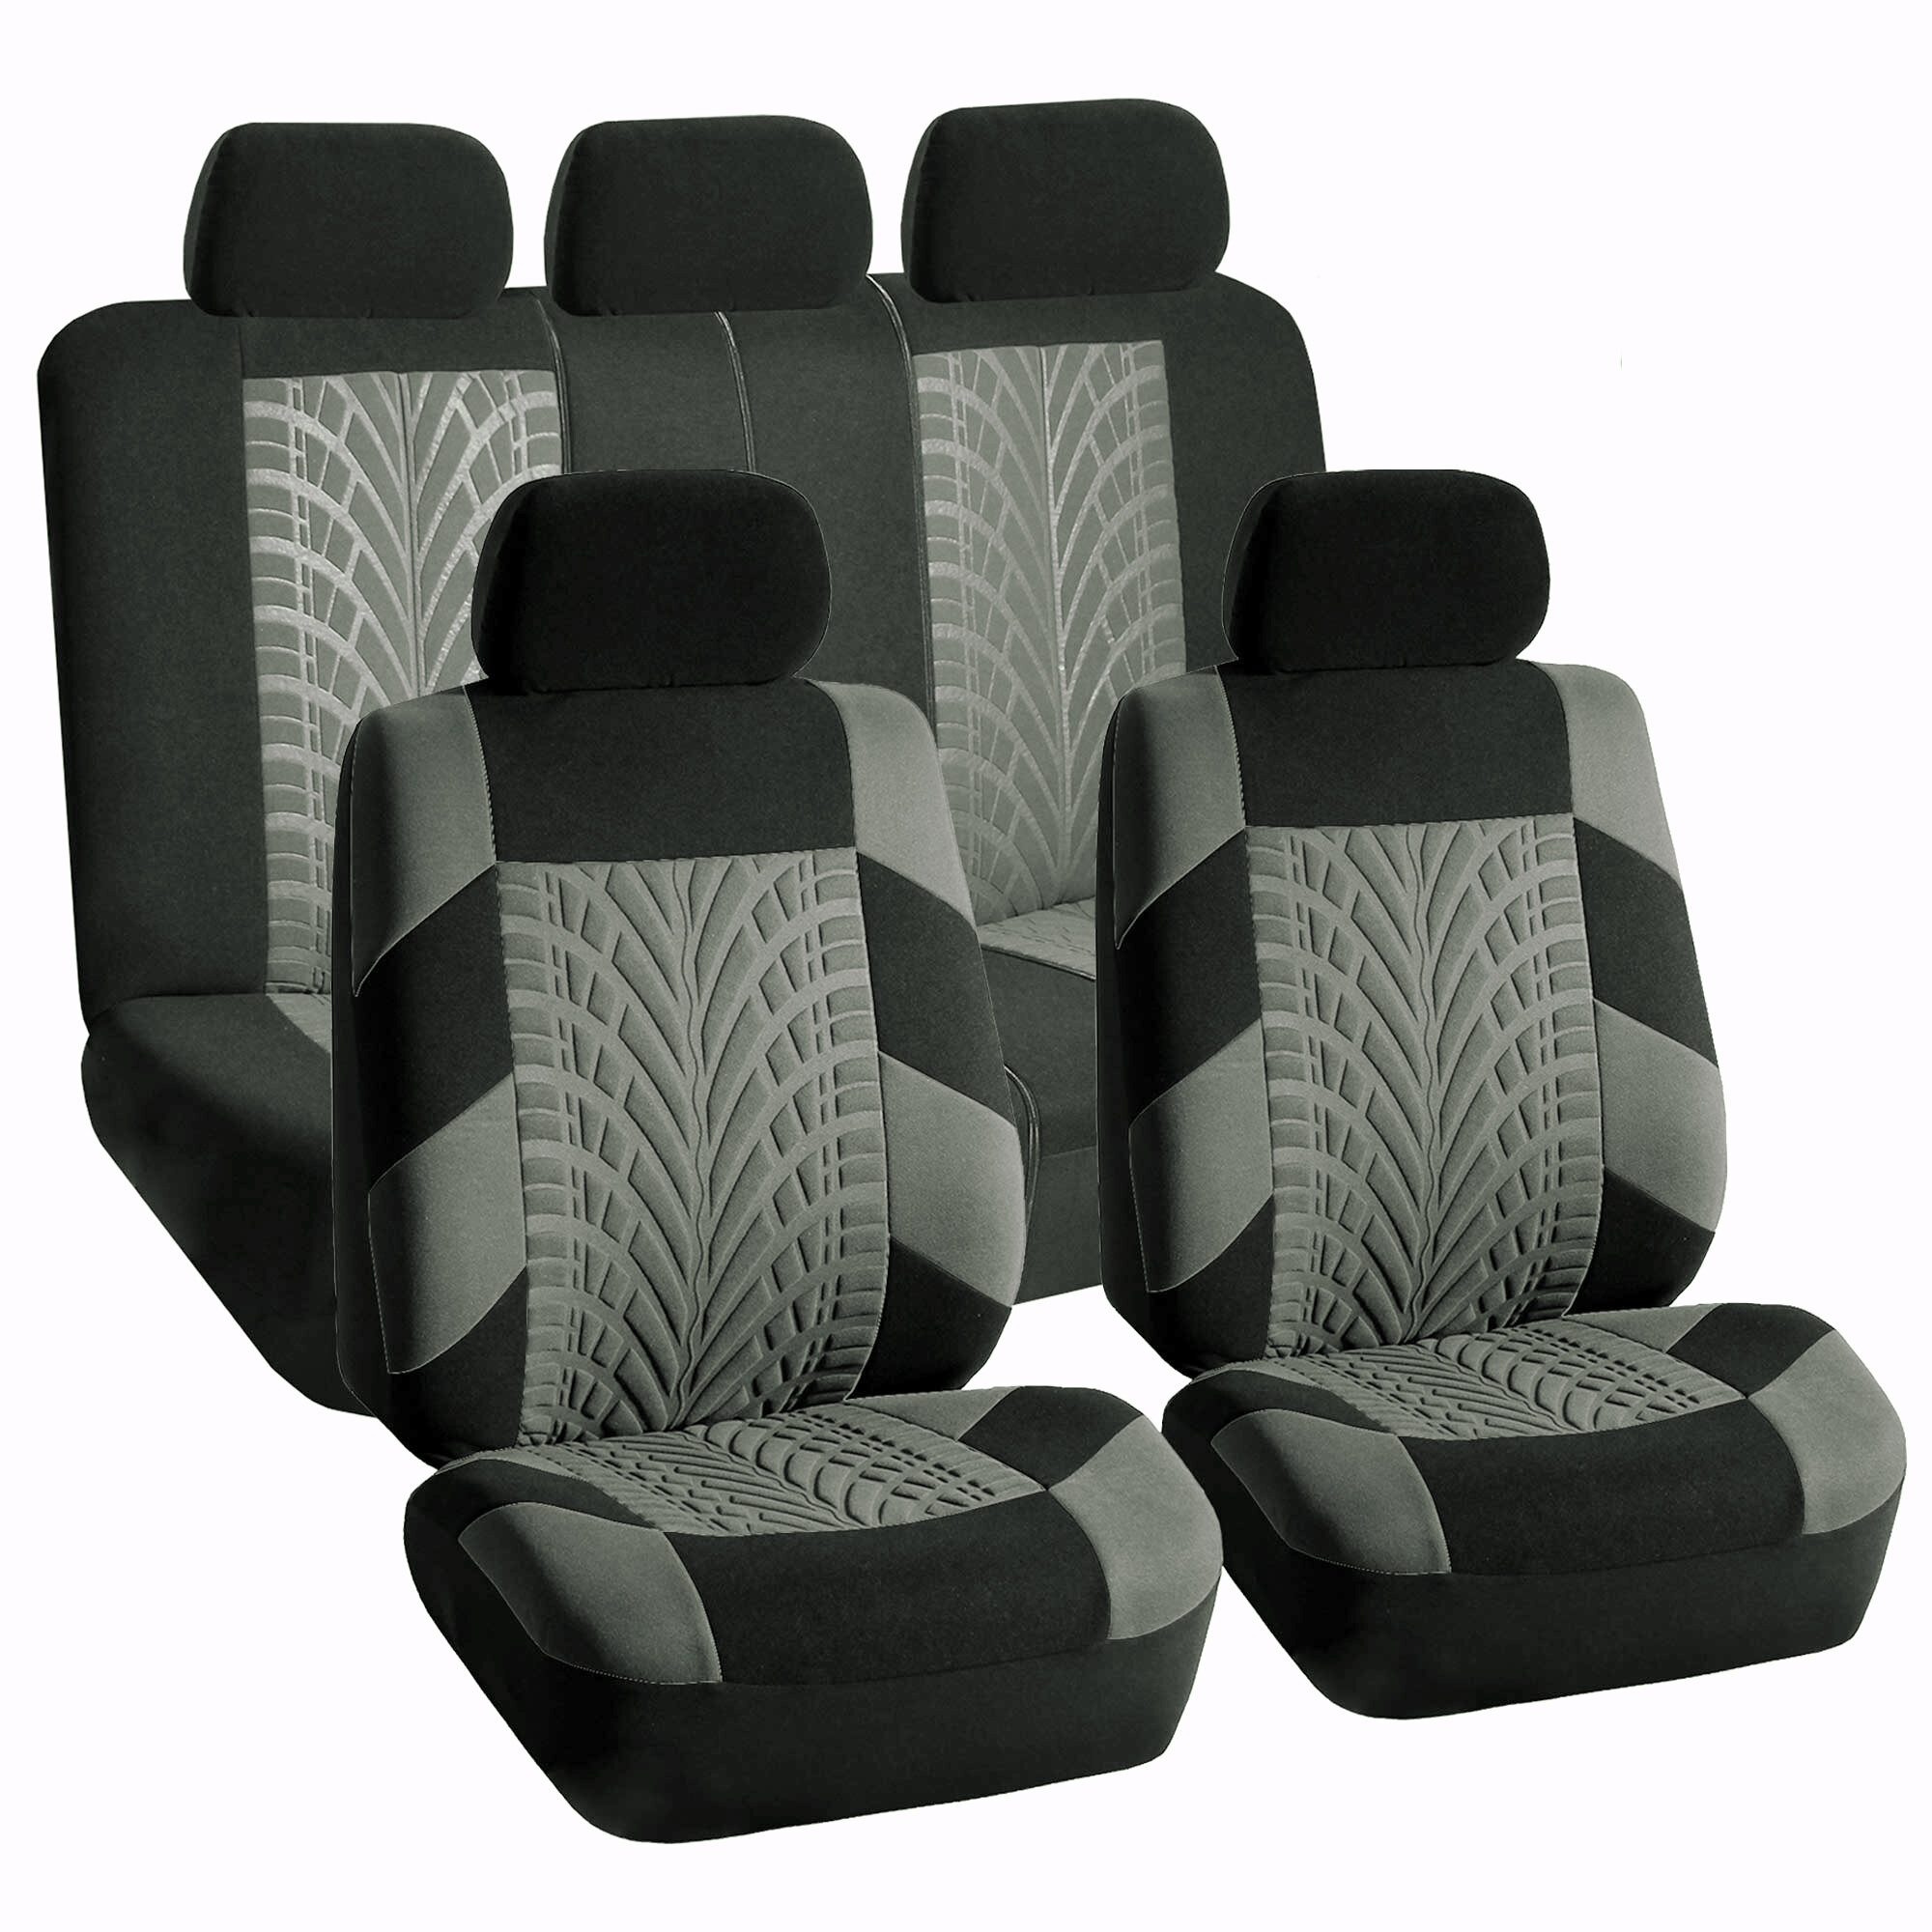 FH Group Travel Master Seat Covers Full Set Wayfair